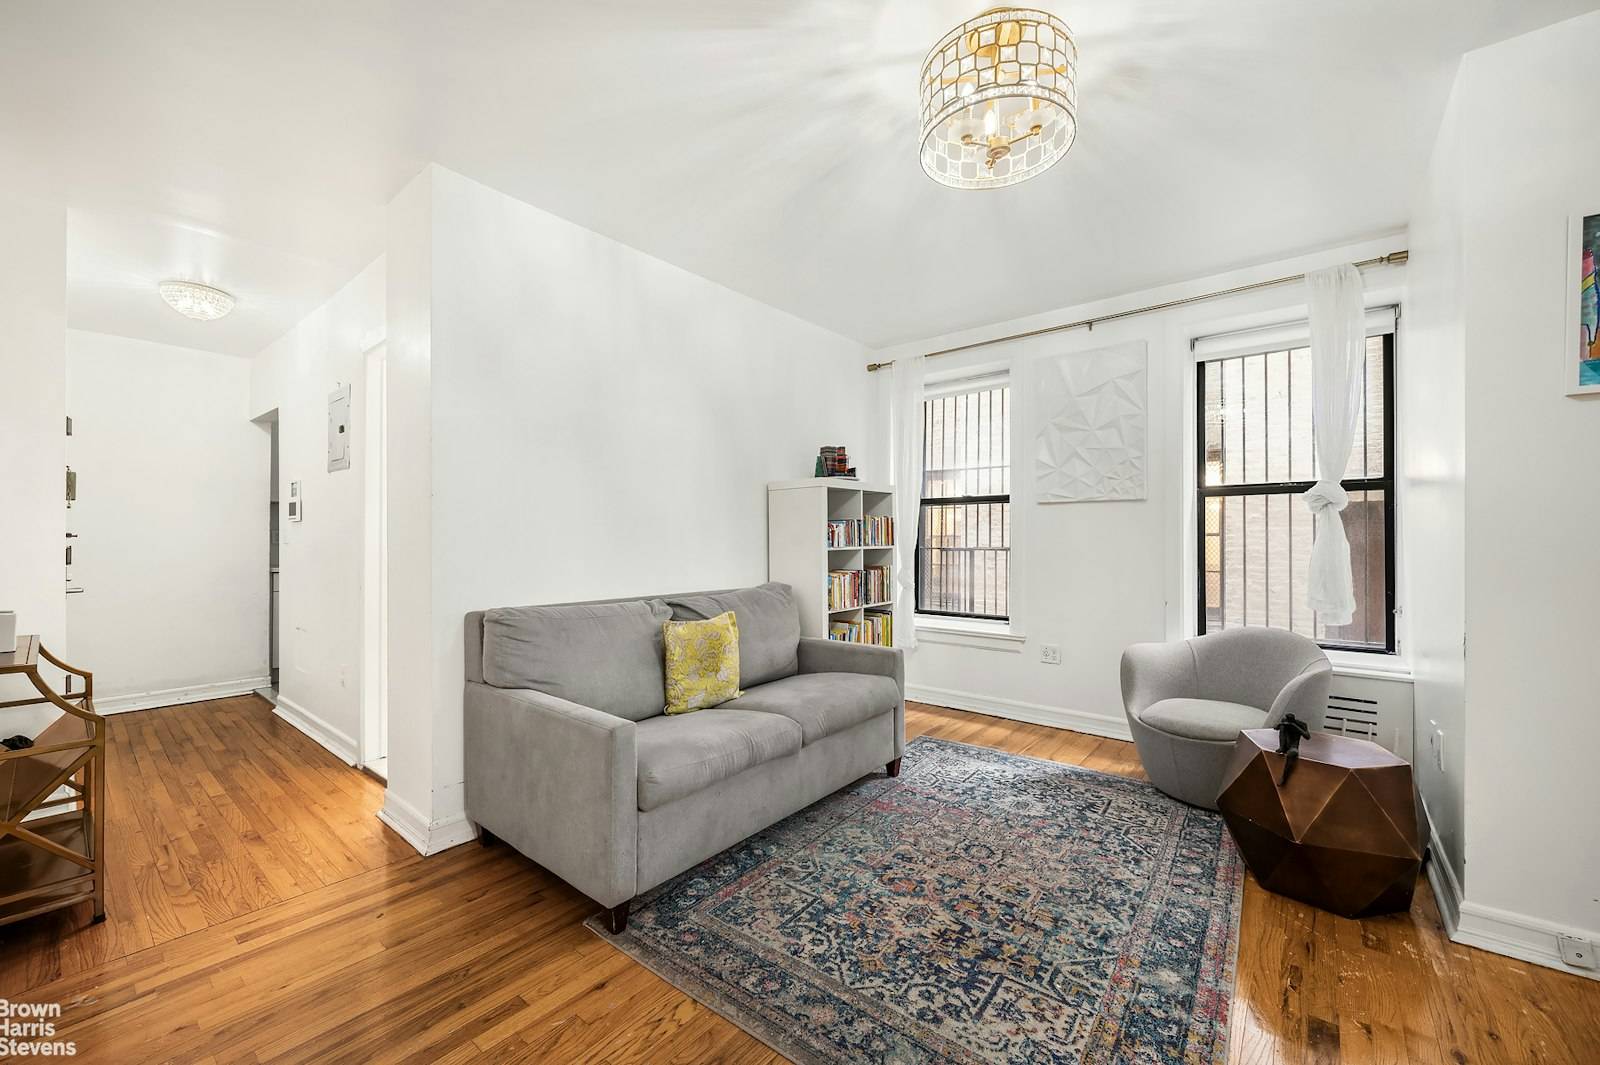 Welcome to this charming 2 bedroom, 1 bathroom co op unit in the heart of Harlem between Lenox and Fifth Ave.